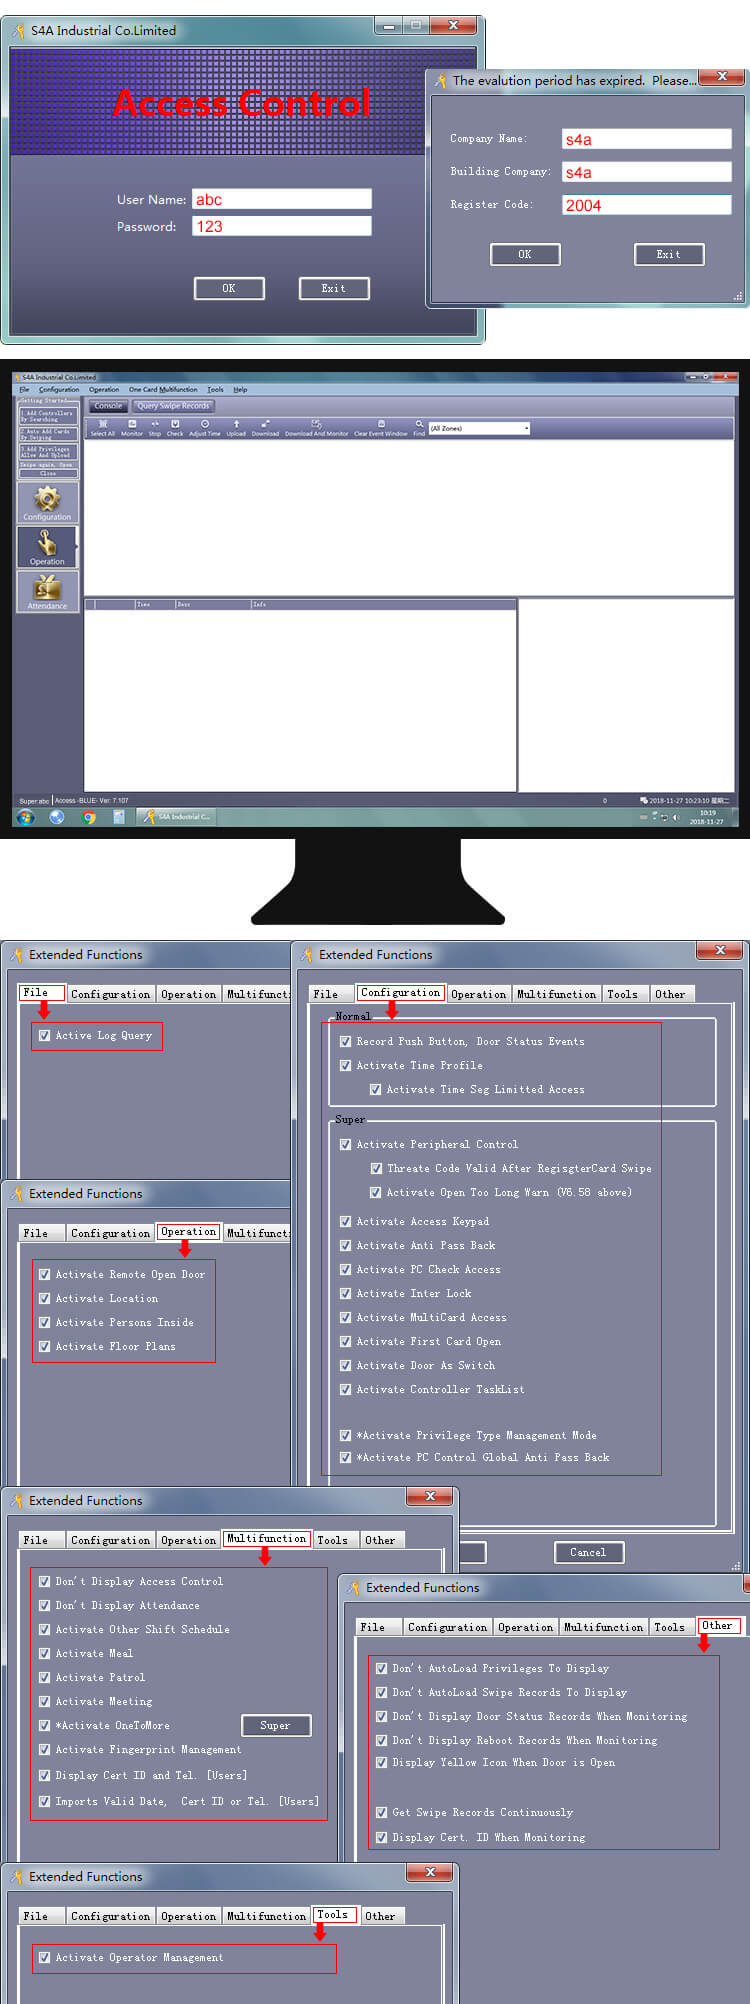 S4A Access control systems Software -available Functions 2019.jpg